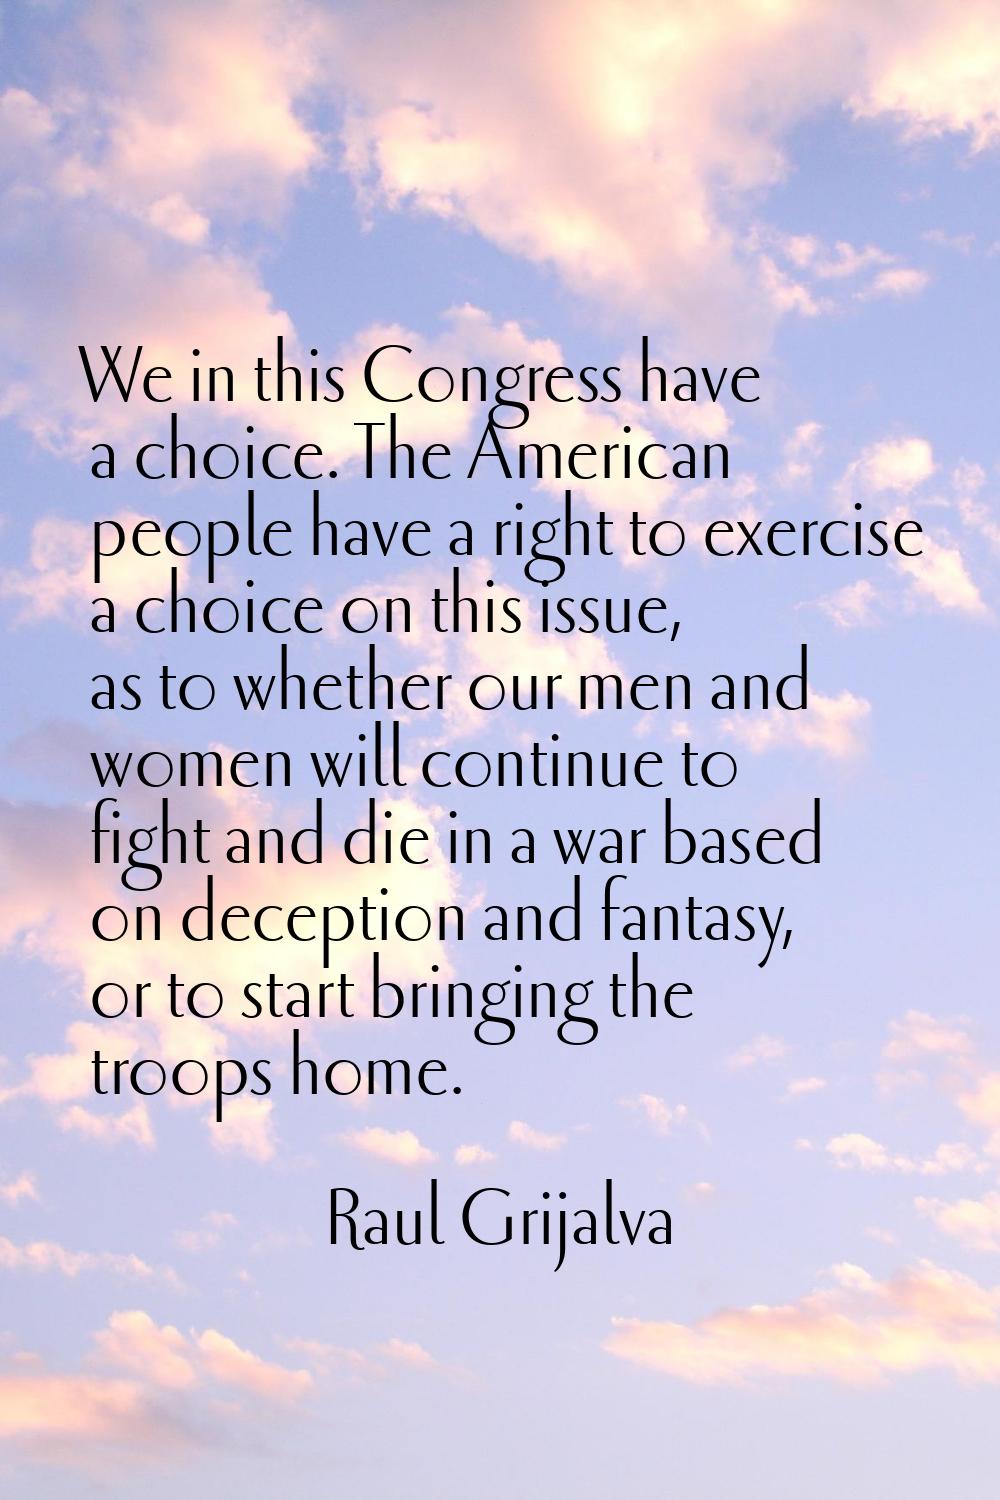 We in this Congress have a choice. The American people have a right to exercise a choice on this is